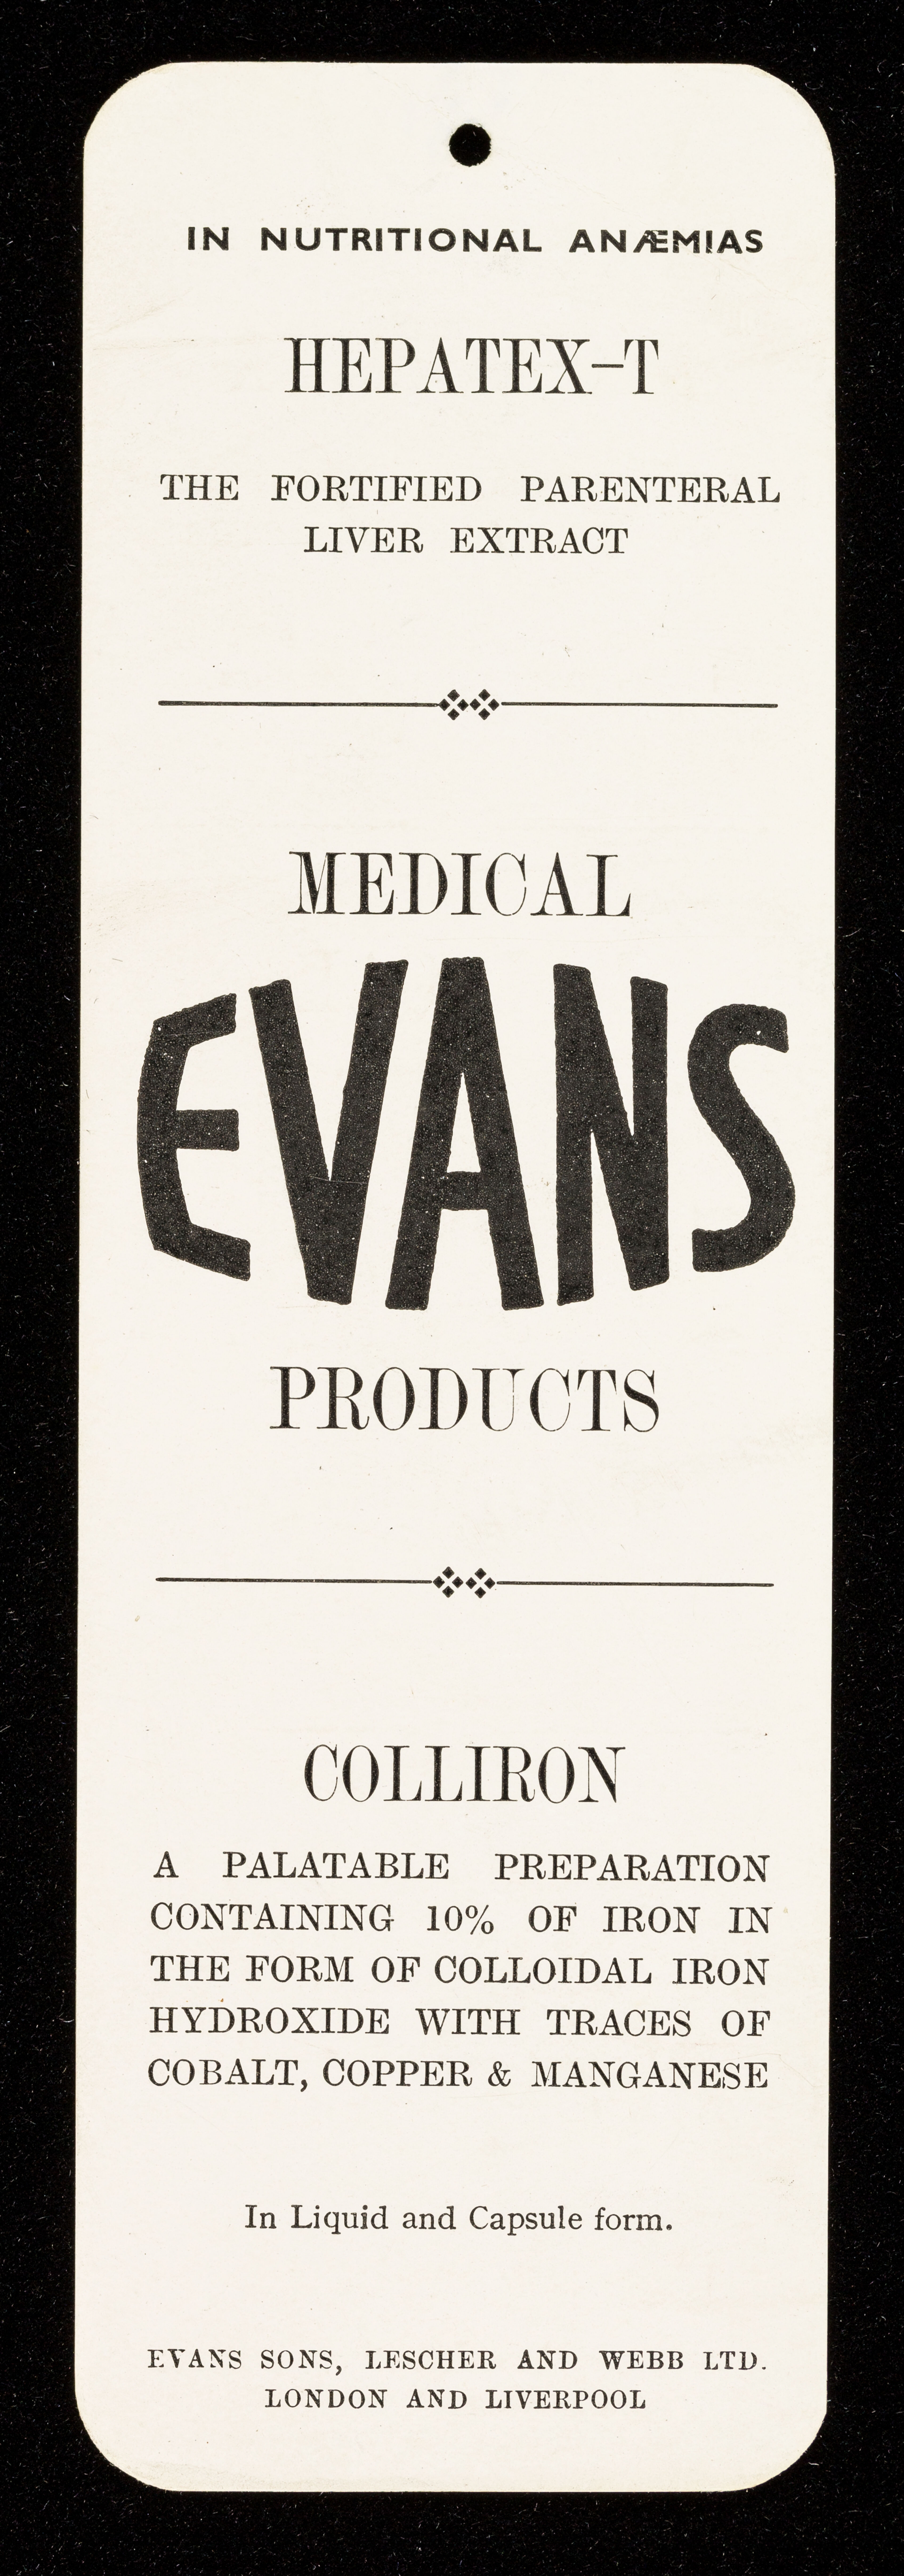 Medical Evans products.